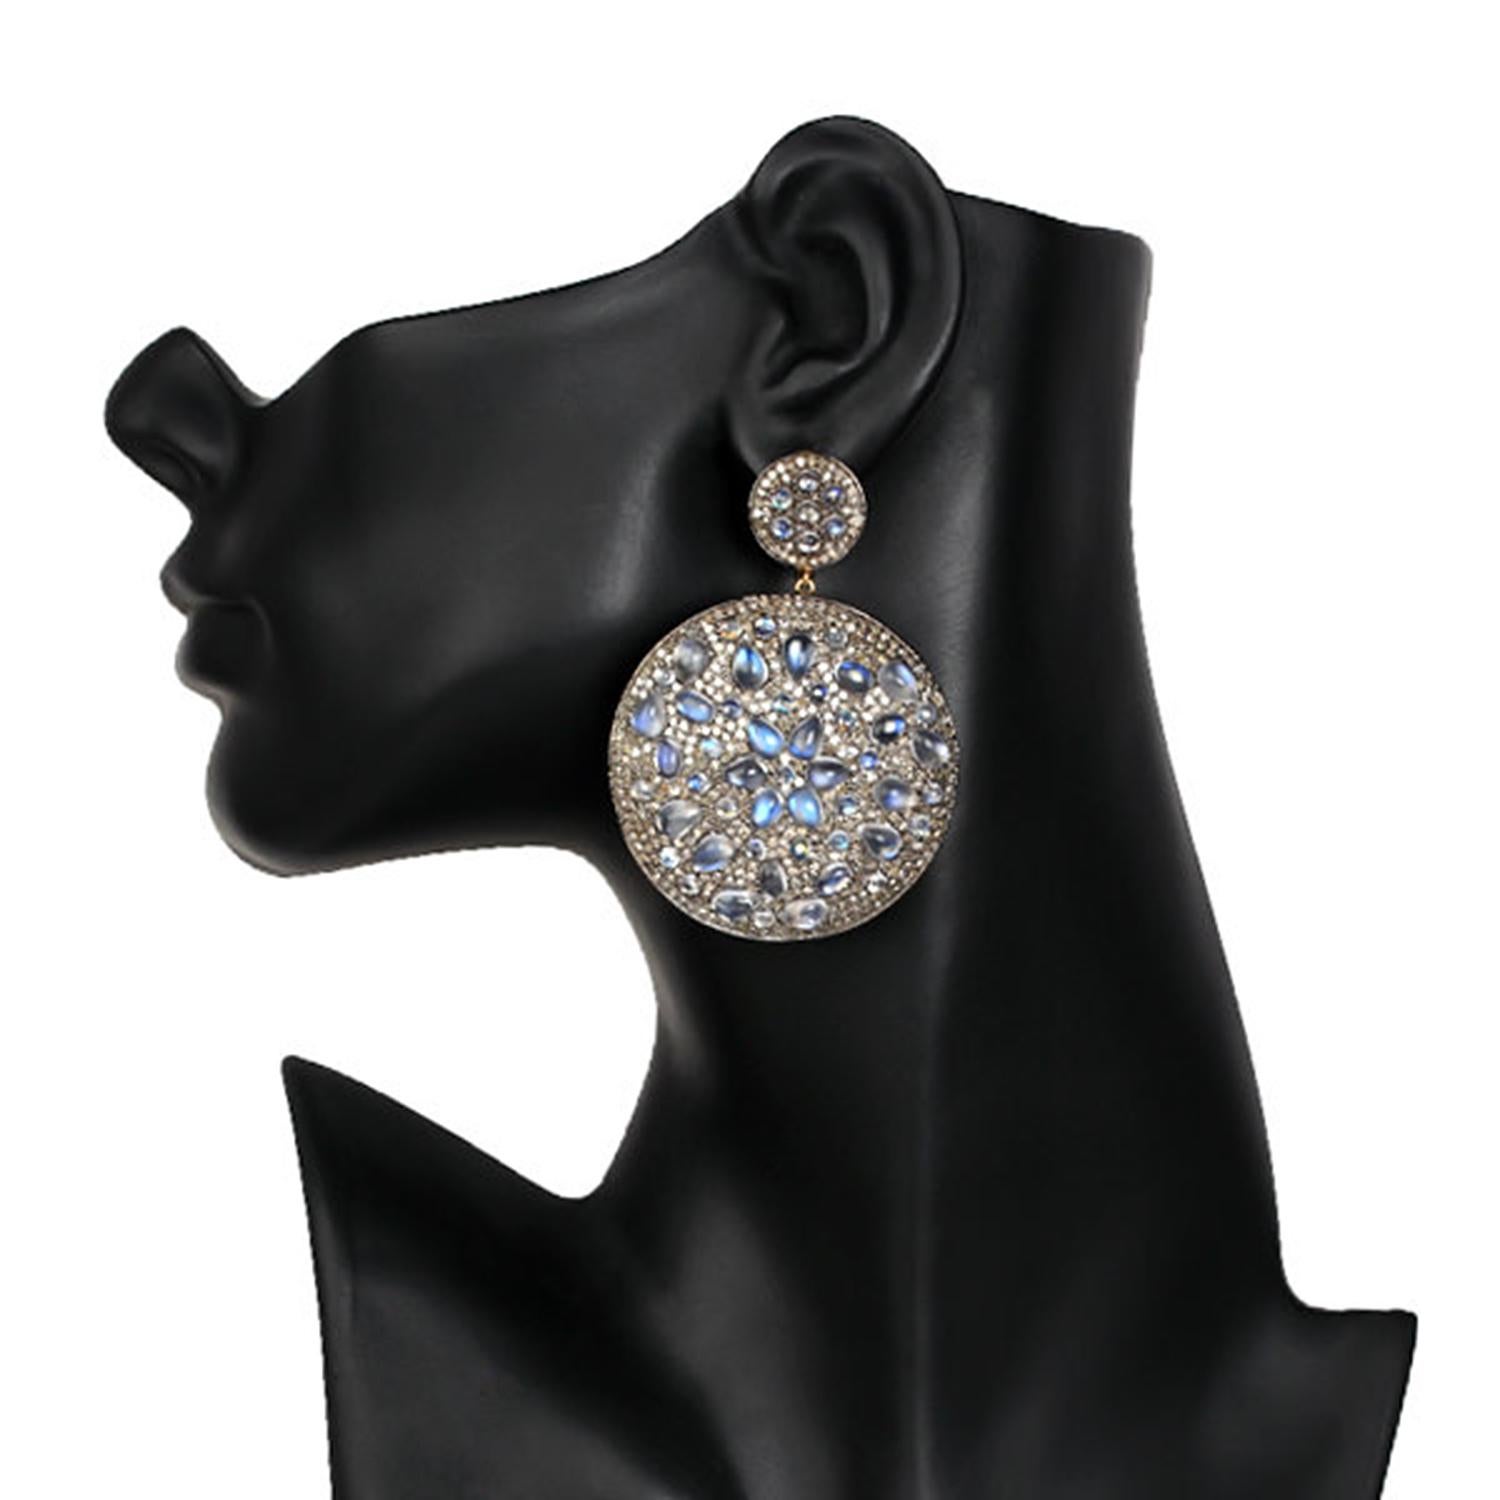 Contemporary Pave Diamond Earrings Equipped with Moonstones Made in 14k Yellow Gold For Sale